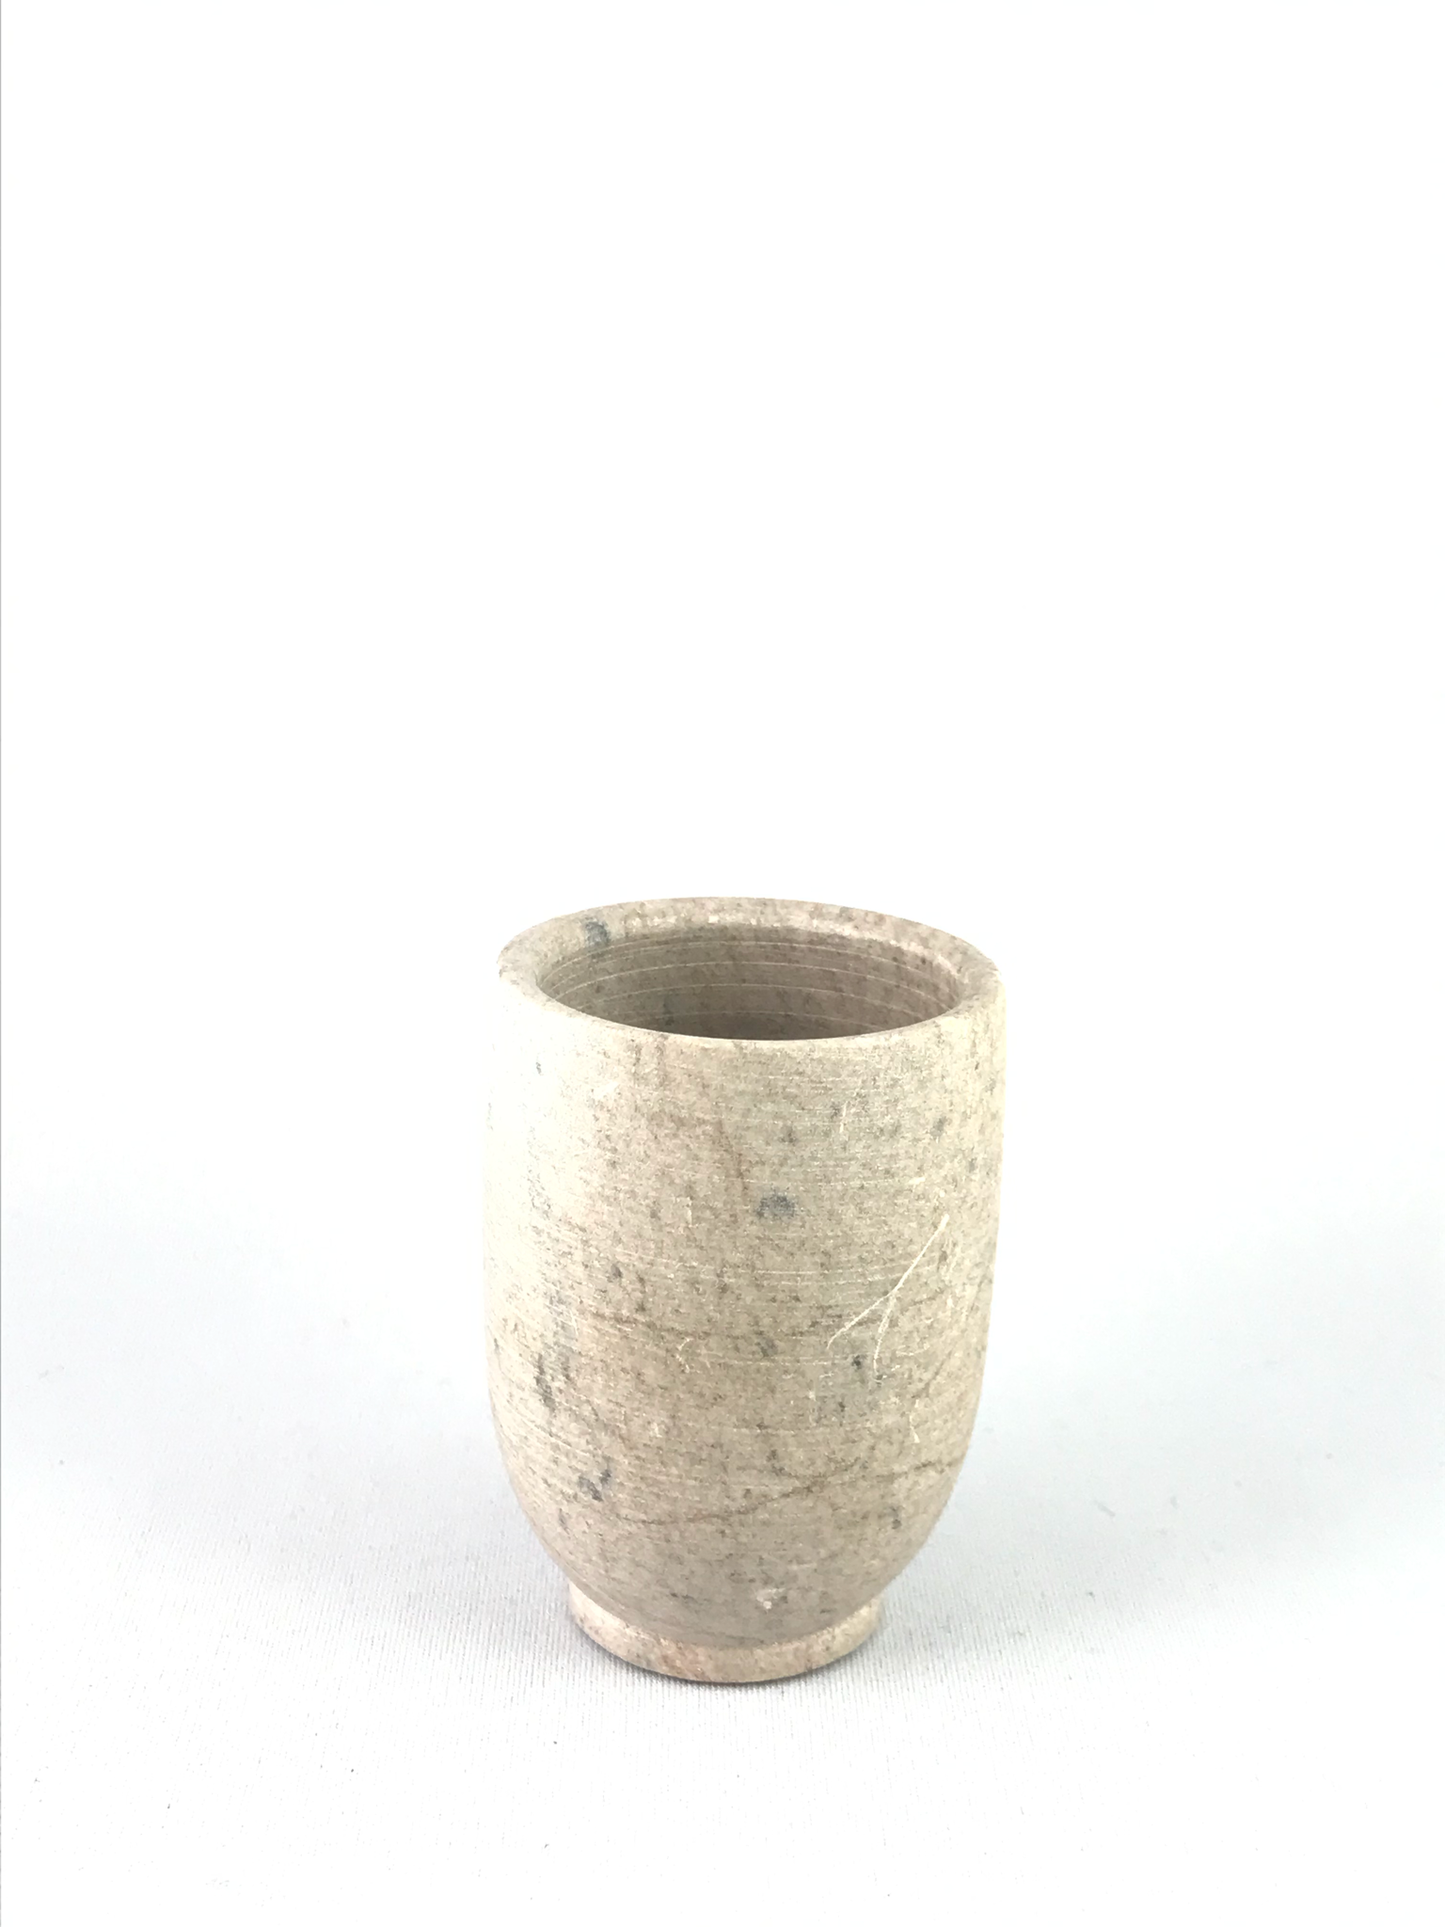 Stone Cup without Handler / Copo (dose) de Pedra